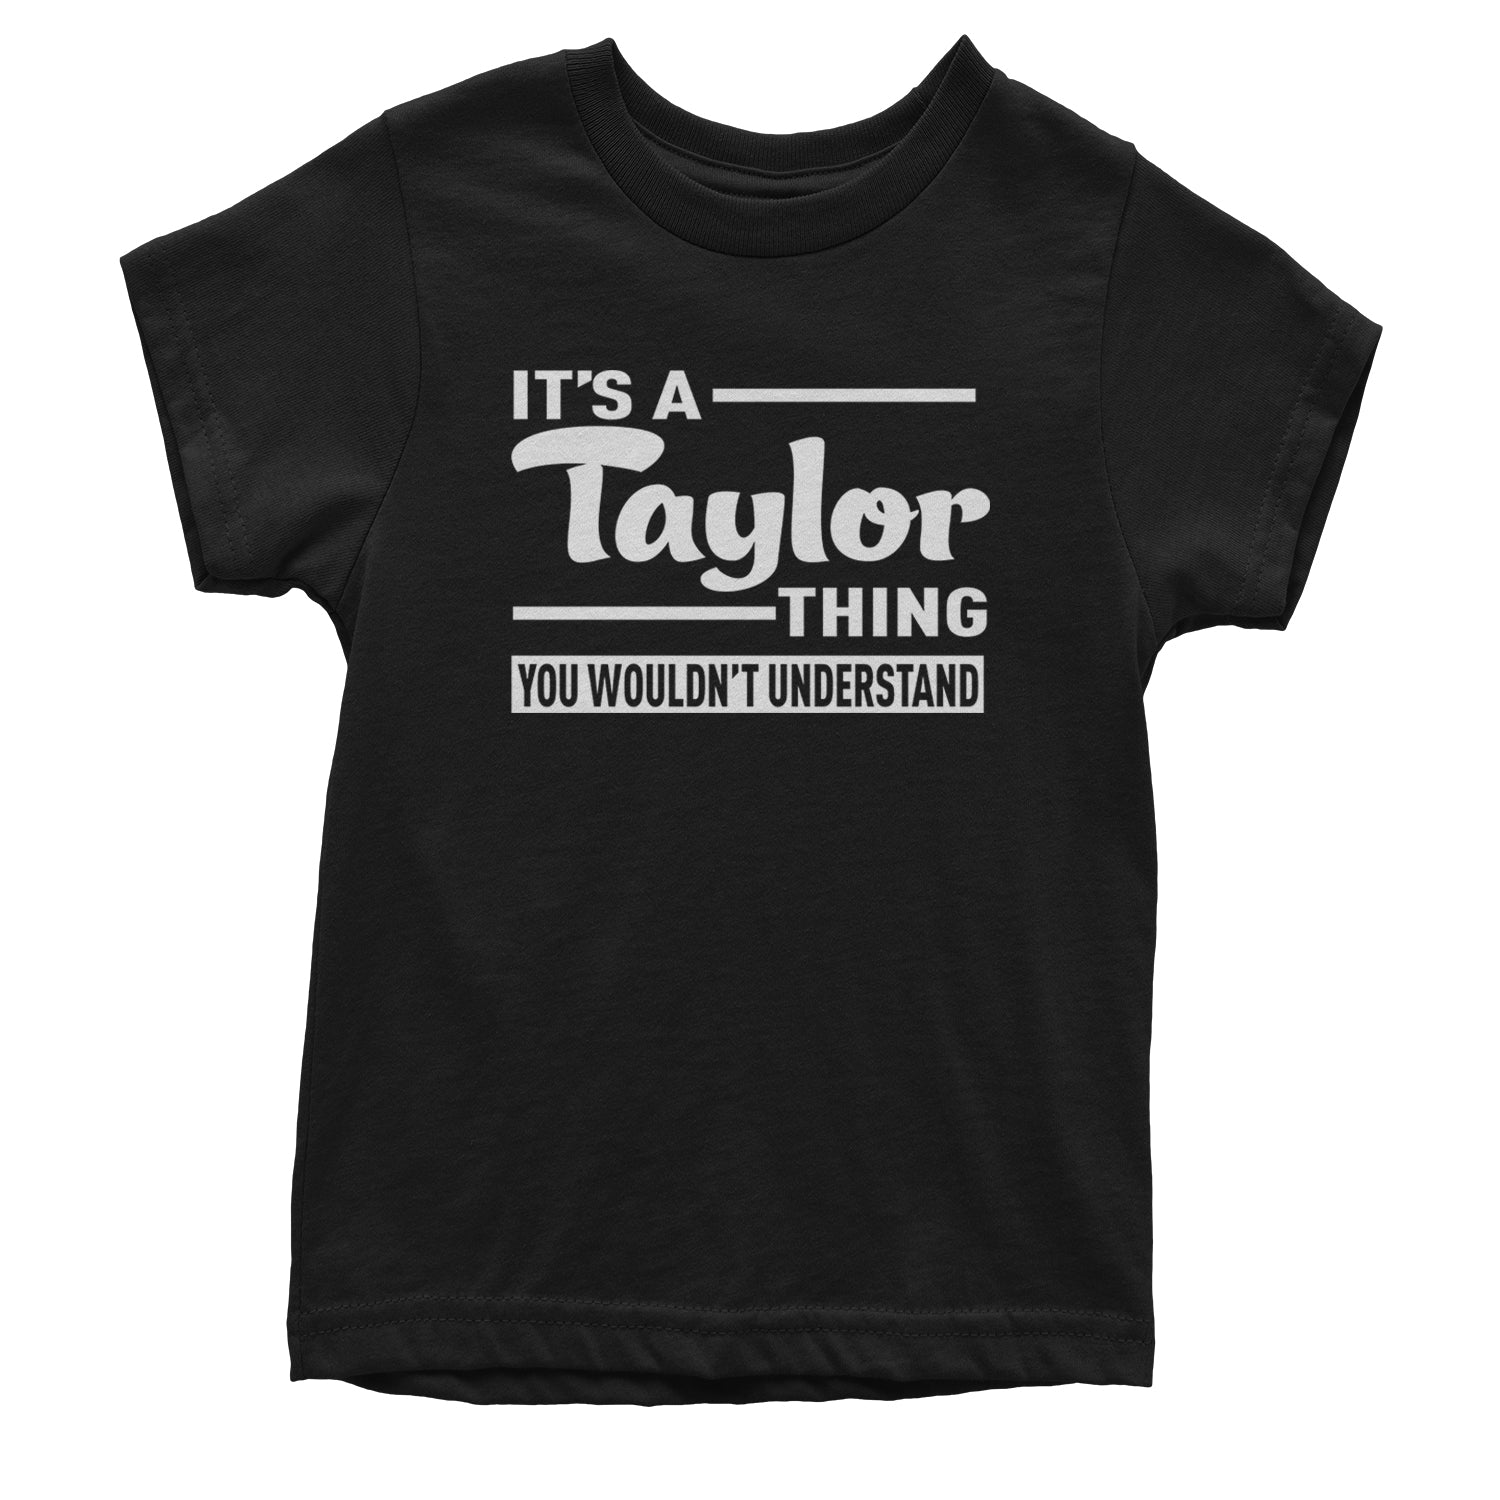 It's A Taylor Thing, You Wouldn't Understand TTPD Youth T-shirt